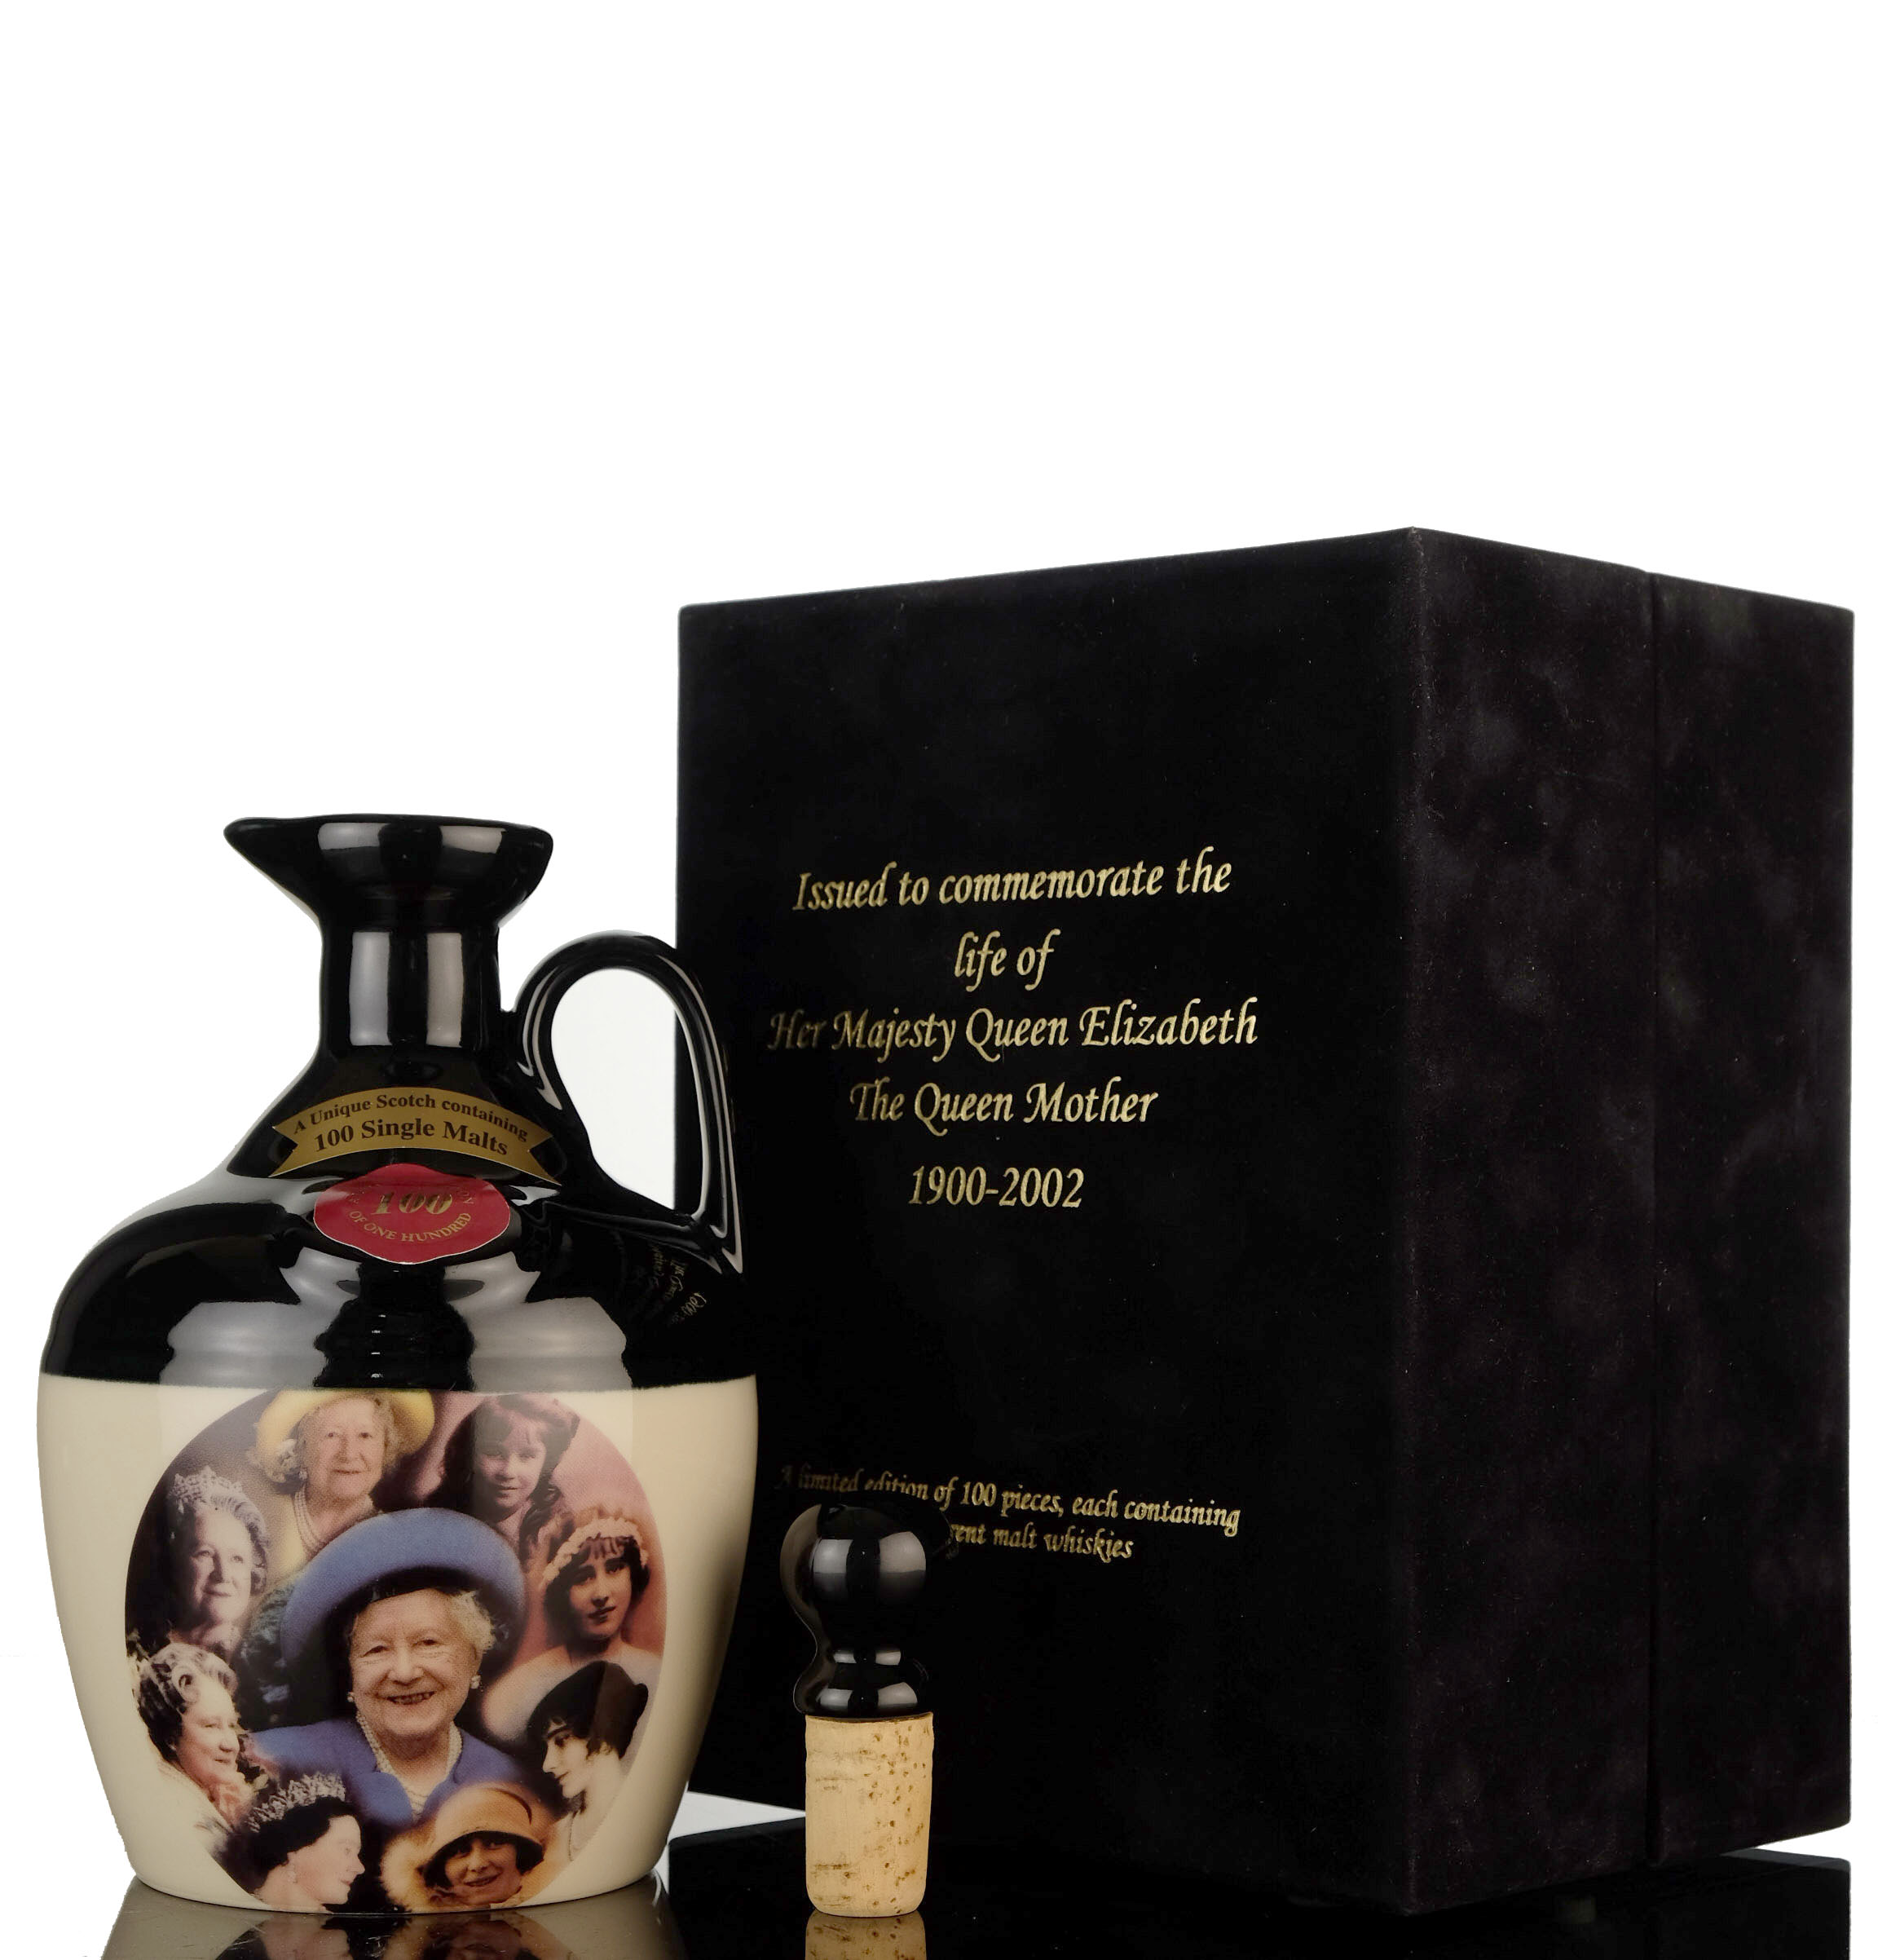 Rutherfords To Commemorate The Life Of Her Majesty Queen Elizabeth The Queen Mother 1990-2